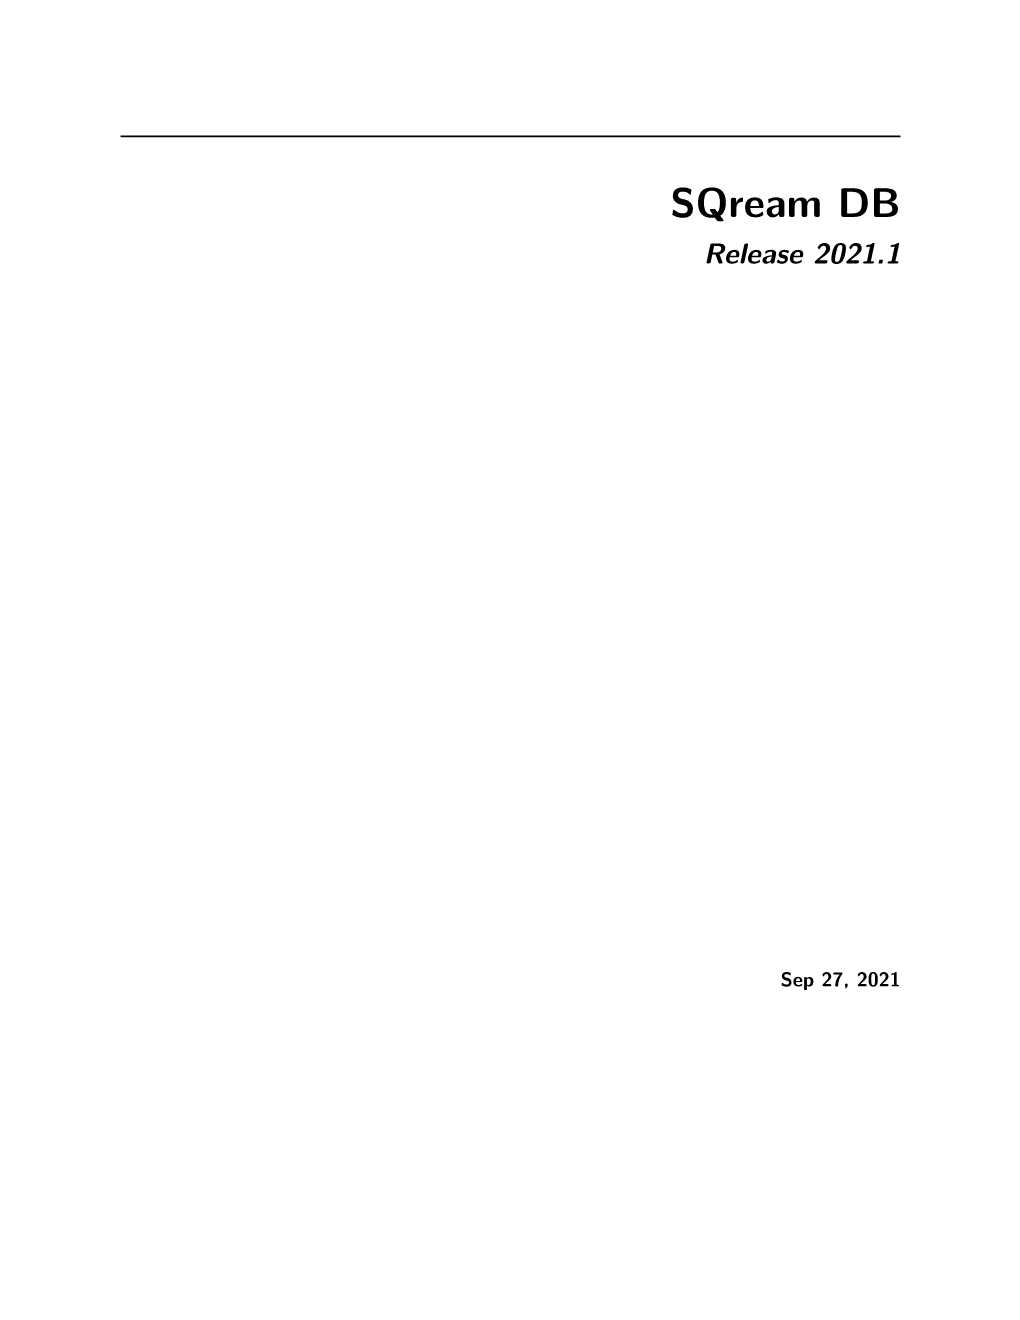 Sqream DB Release 2021.1